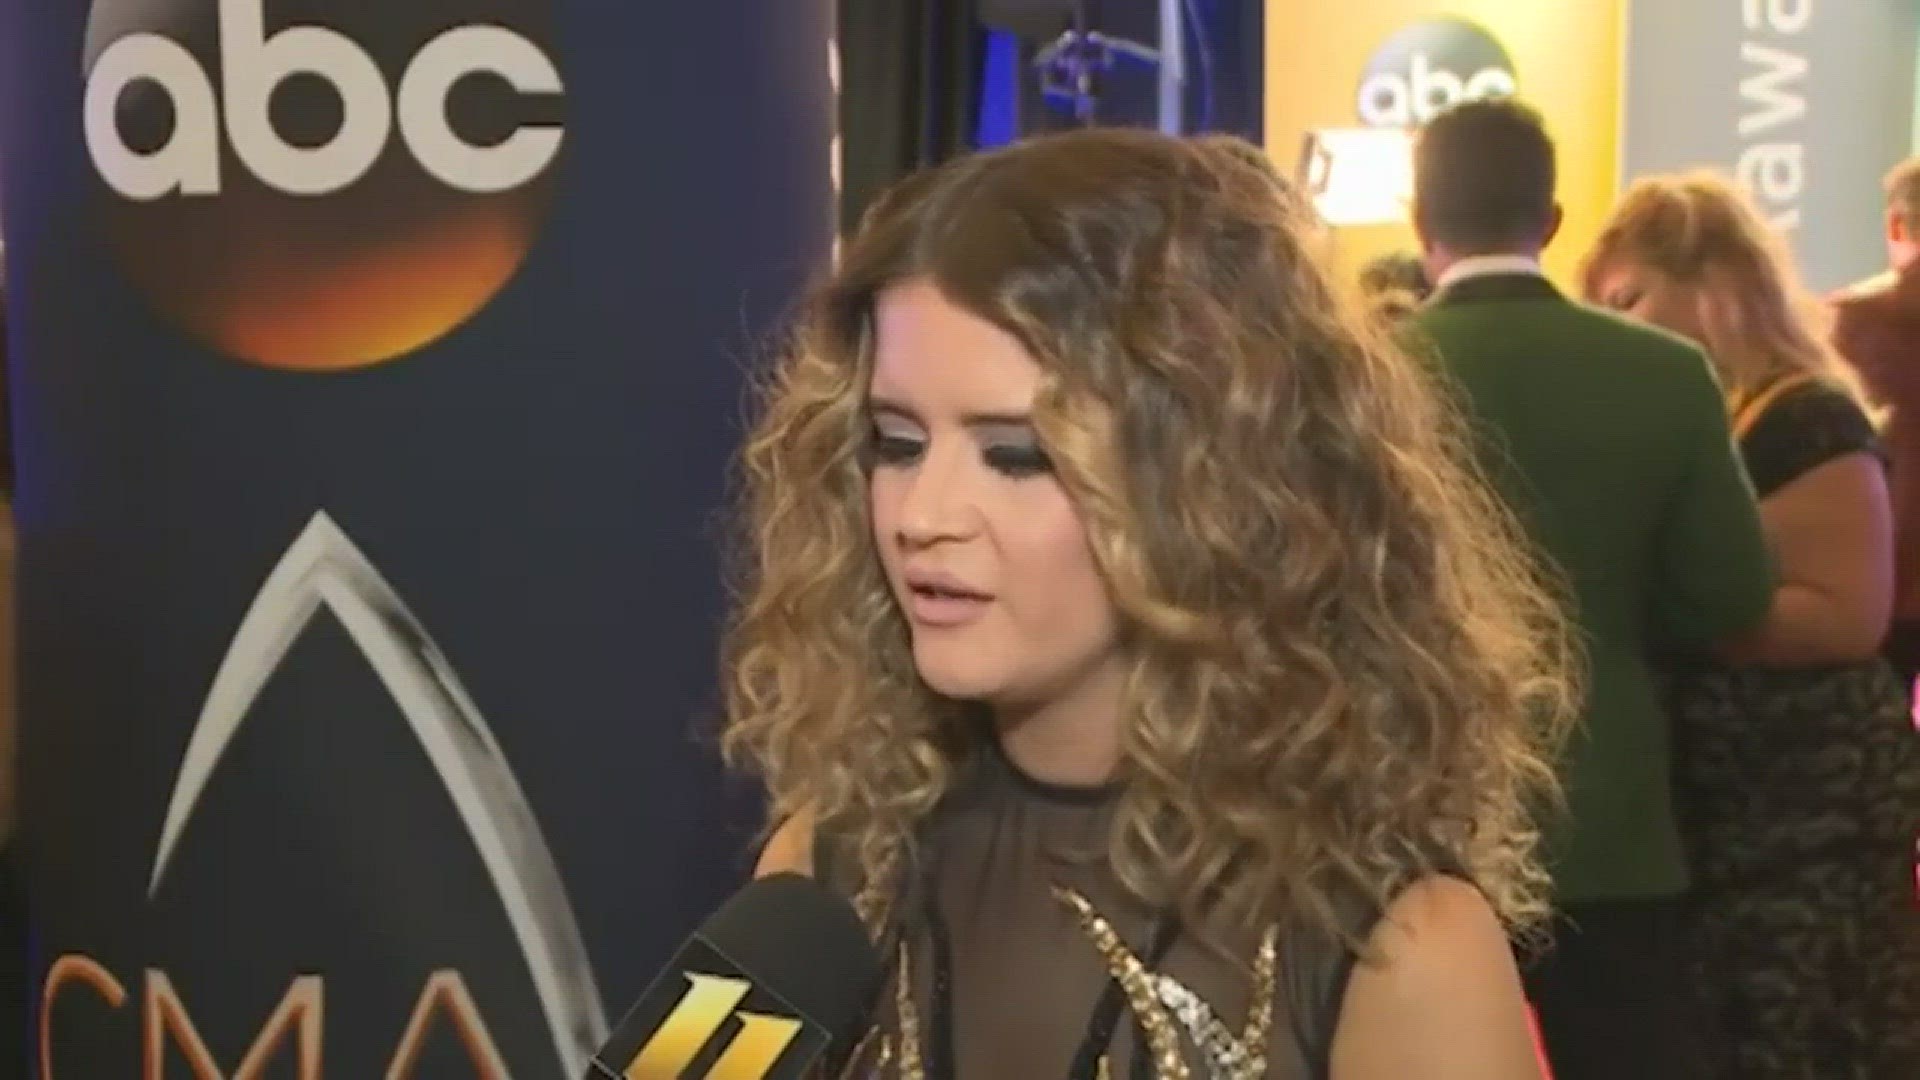 A red carpet interview with CMA's 2016 New Artist of the Year, Maren Morris